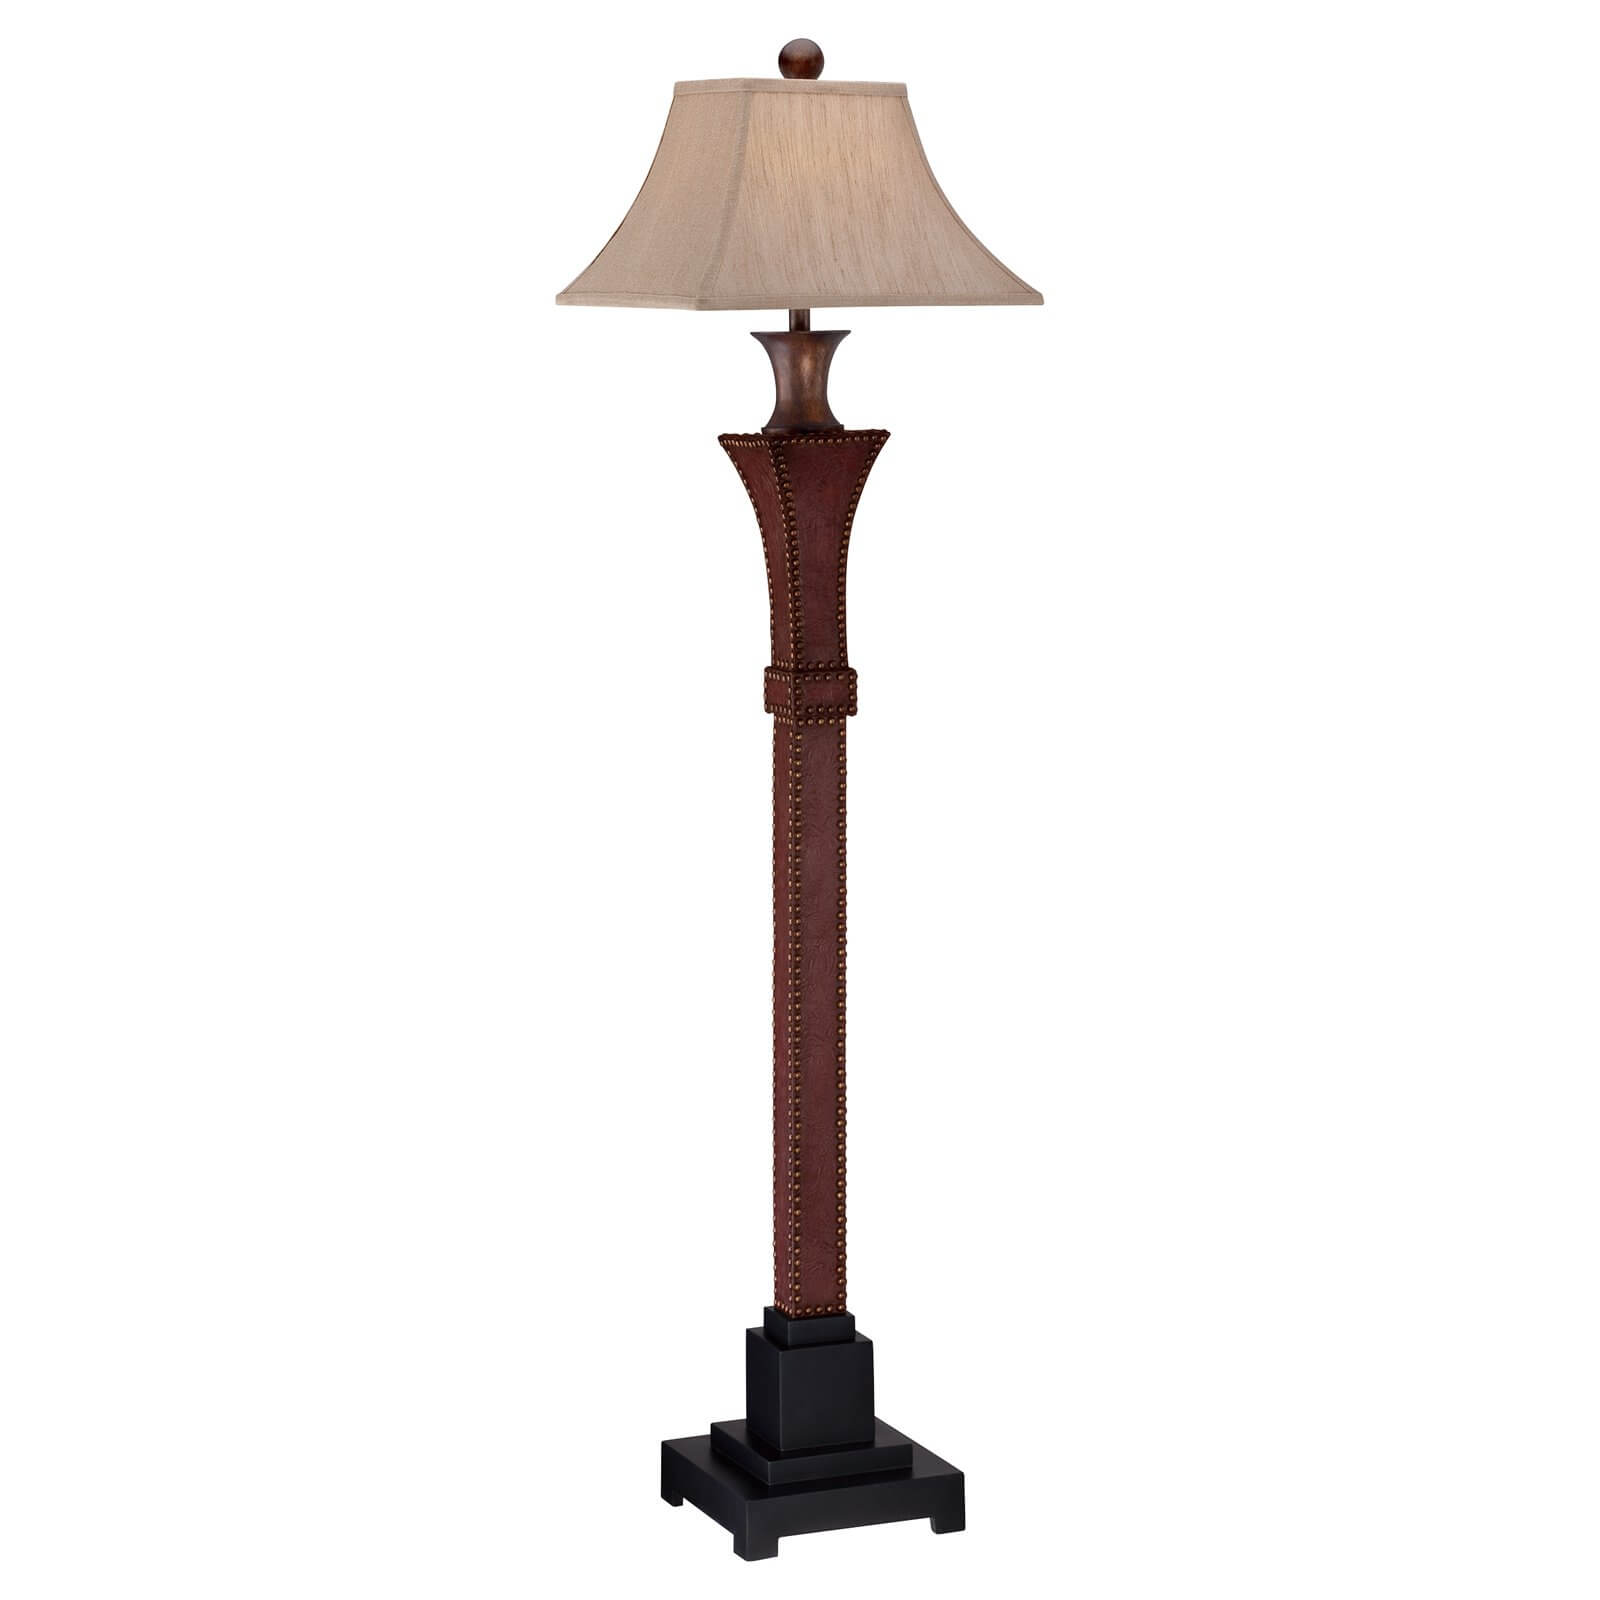 Our first example of a standard design floor lamp is this leather-wrapped wooden model.